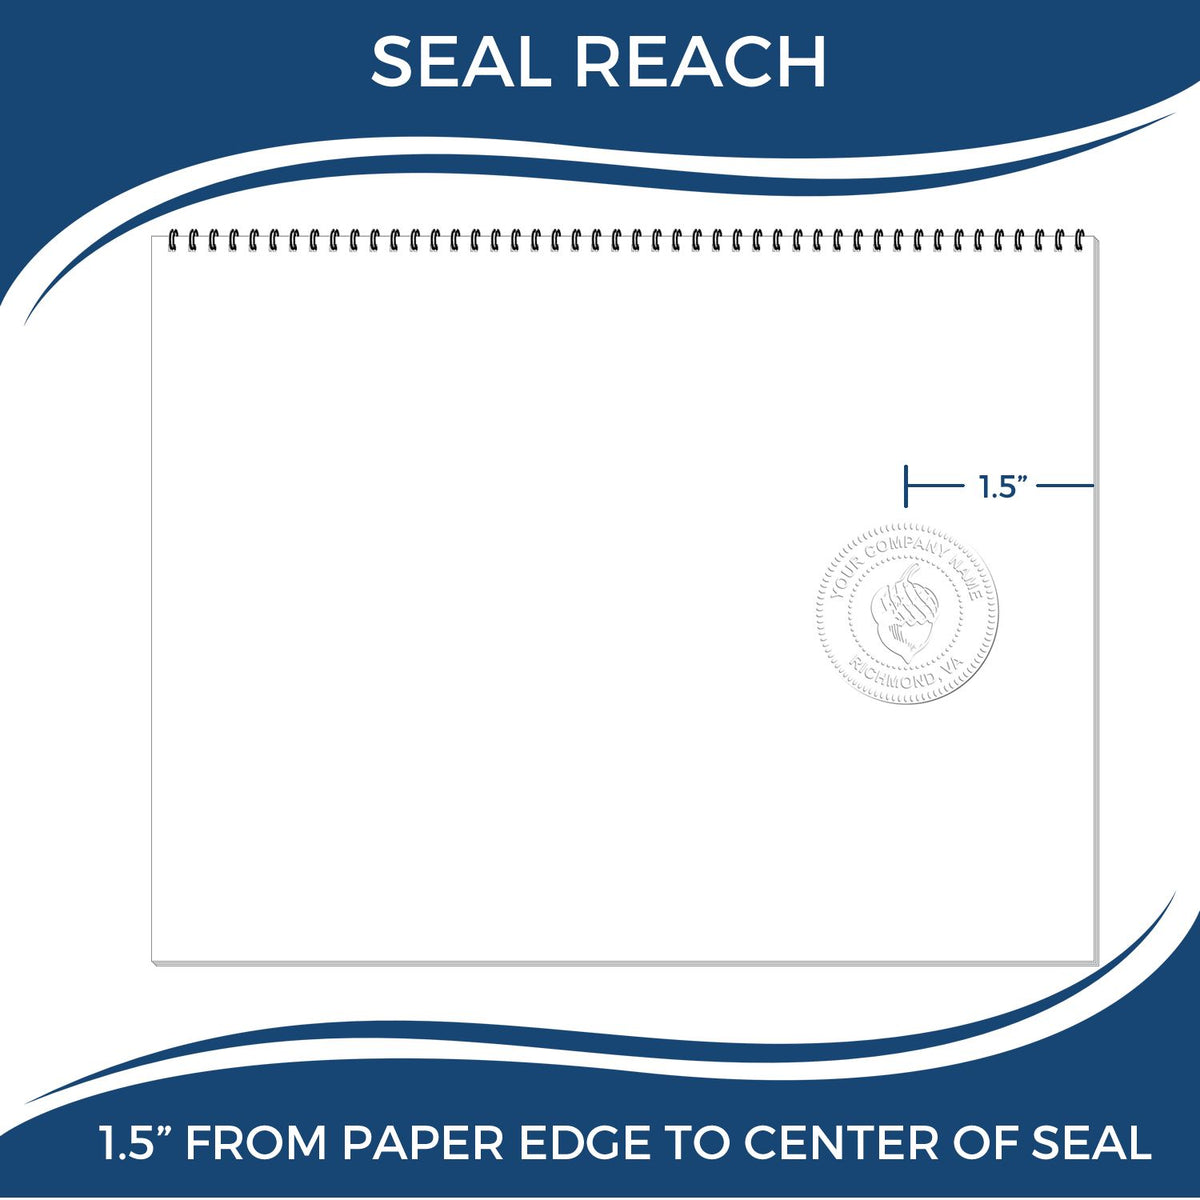 An infographic showing the seal reach which is represented by a ruler and a miniature seal image of the Handheld North Dakota Professional Geologist Embosser